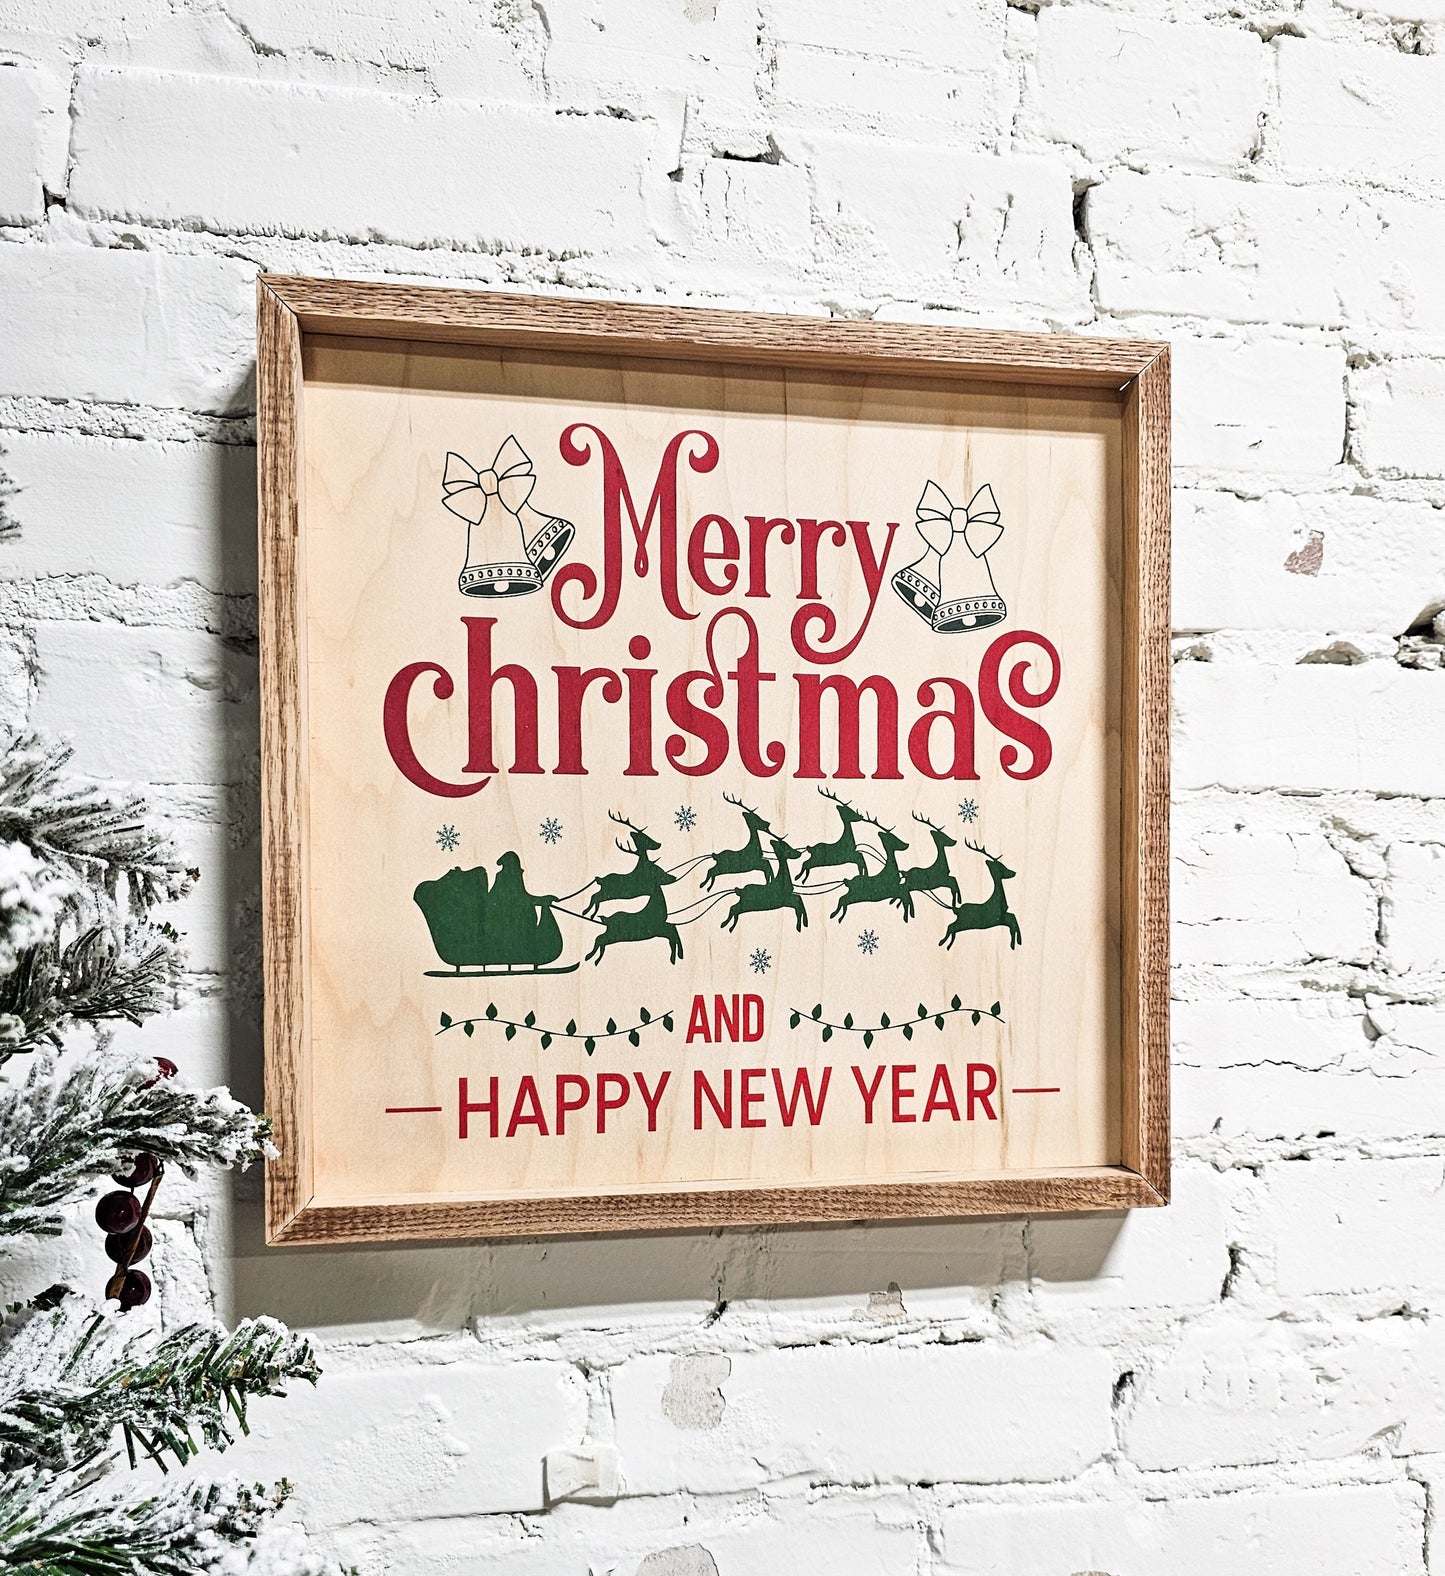 merry christmas and happy new year holiday wooden sign wall decor hanging